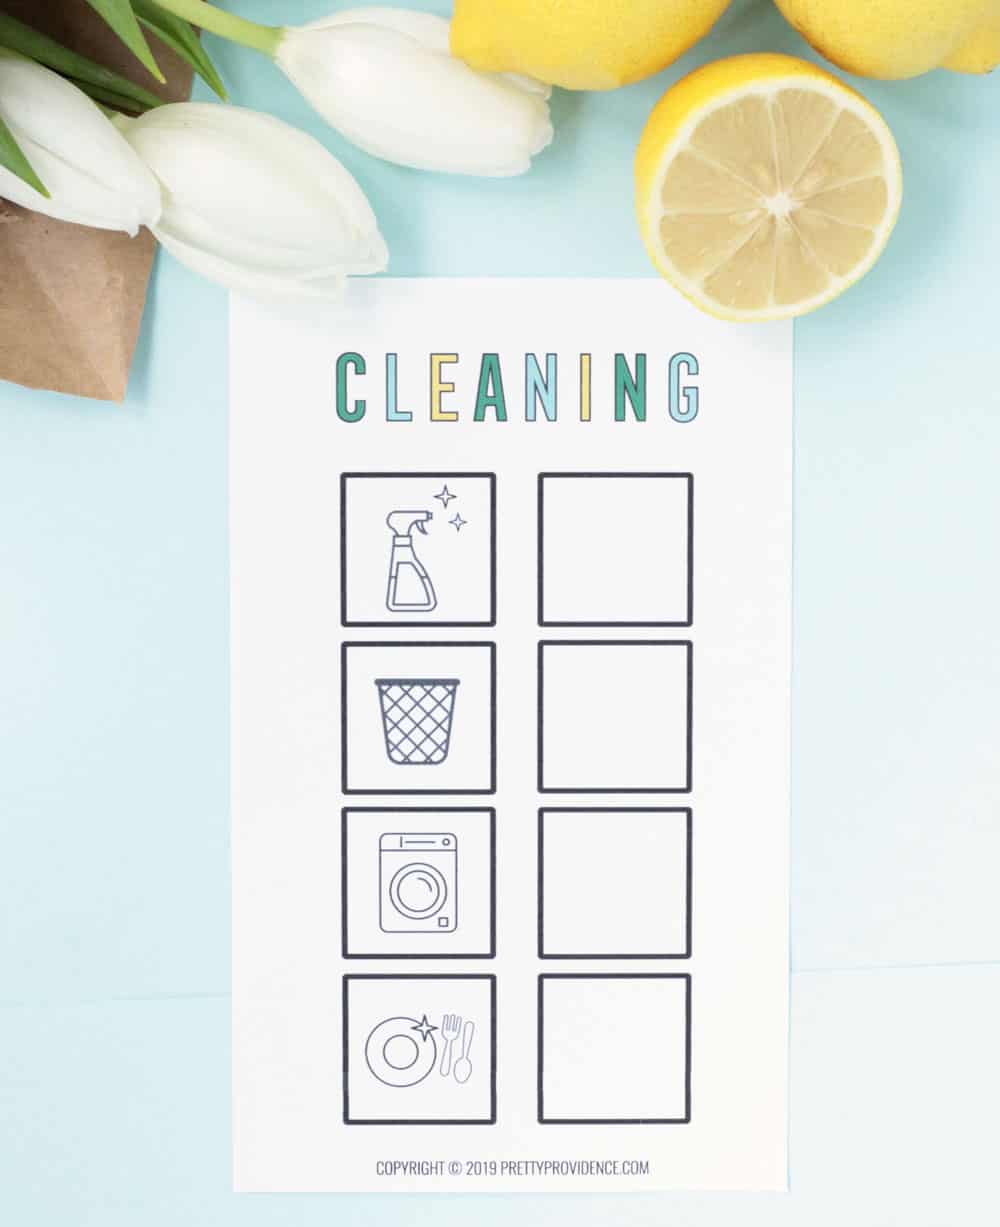 Cleaning checklist for kids with pictures on it and squares to check off tasks as they go.